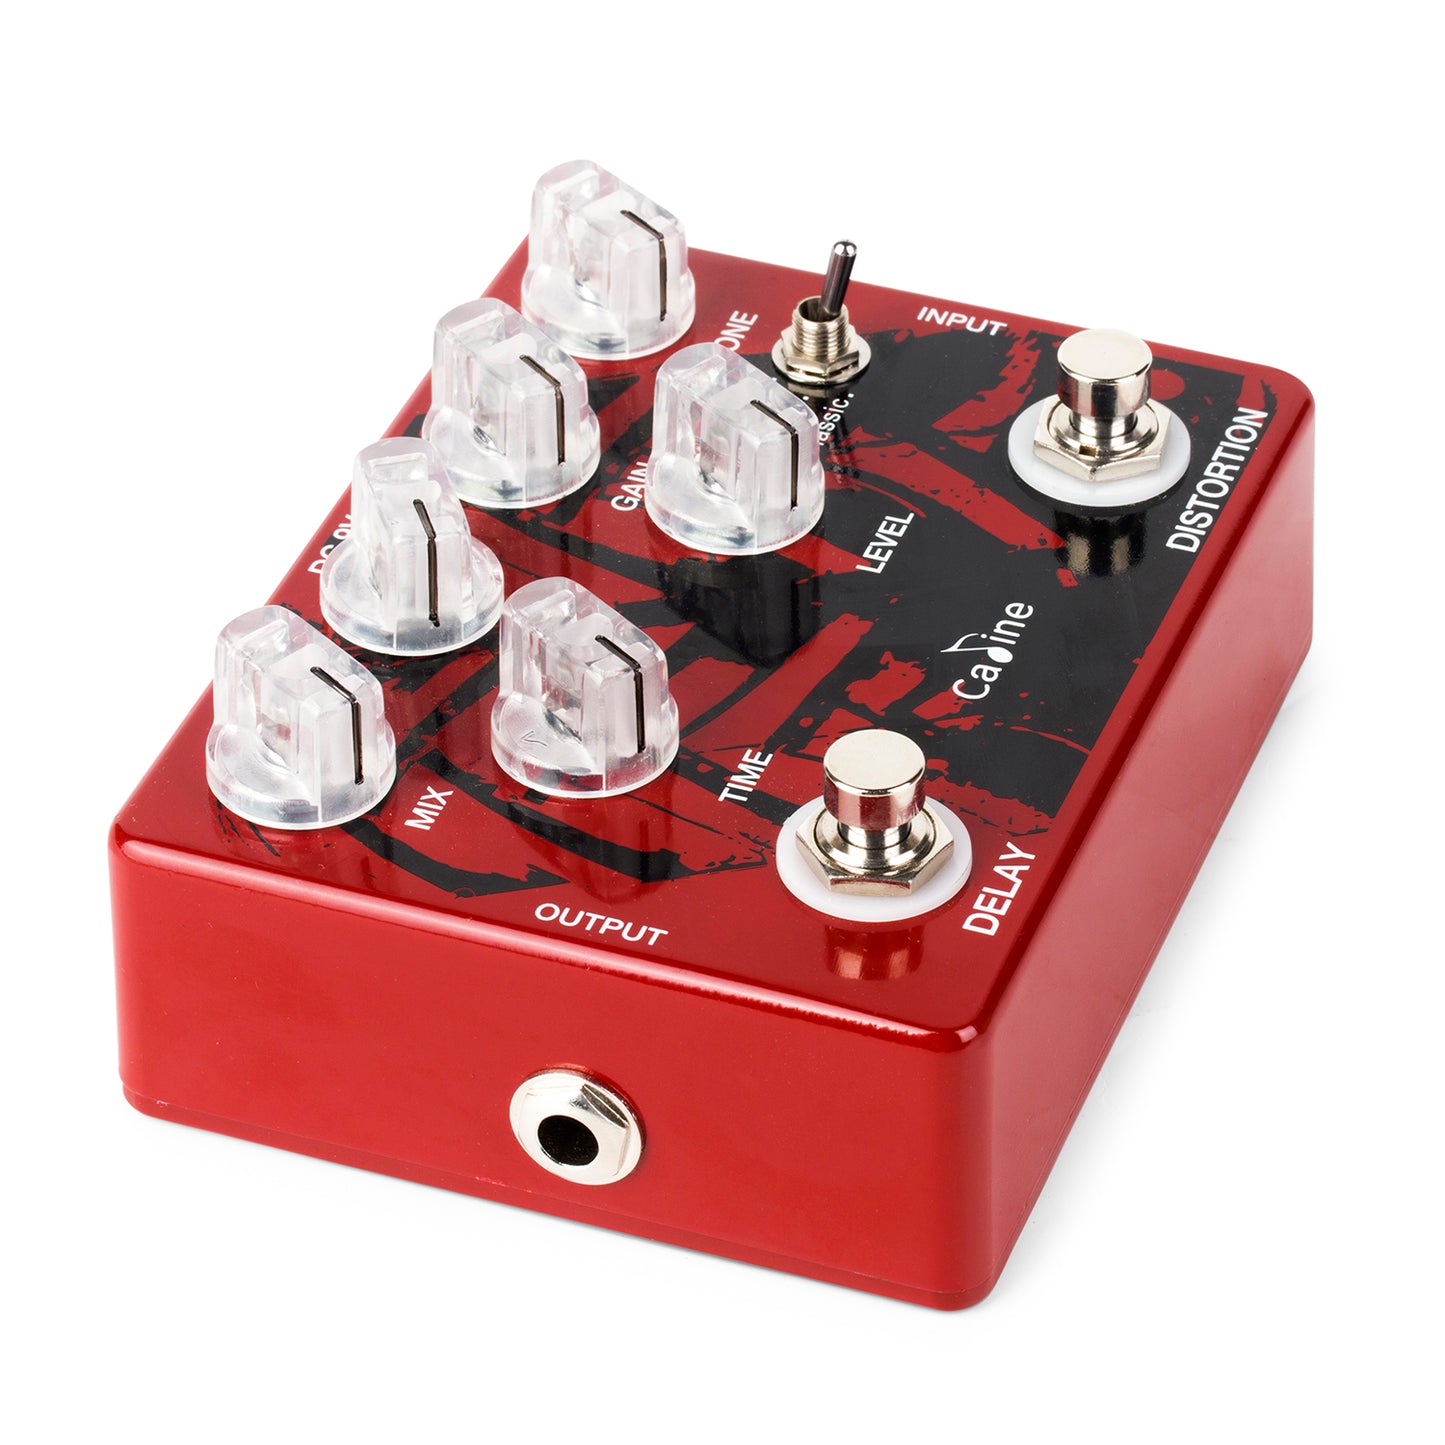 Caline CP-68 Distortion and Delay Guitar Effect Pedal